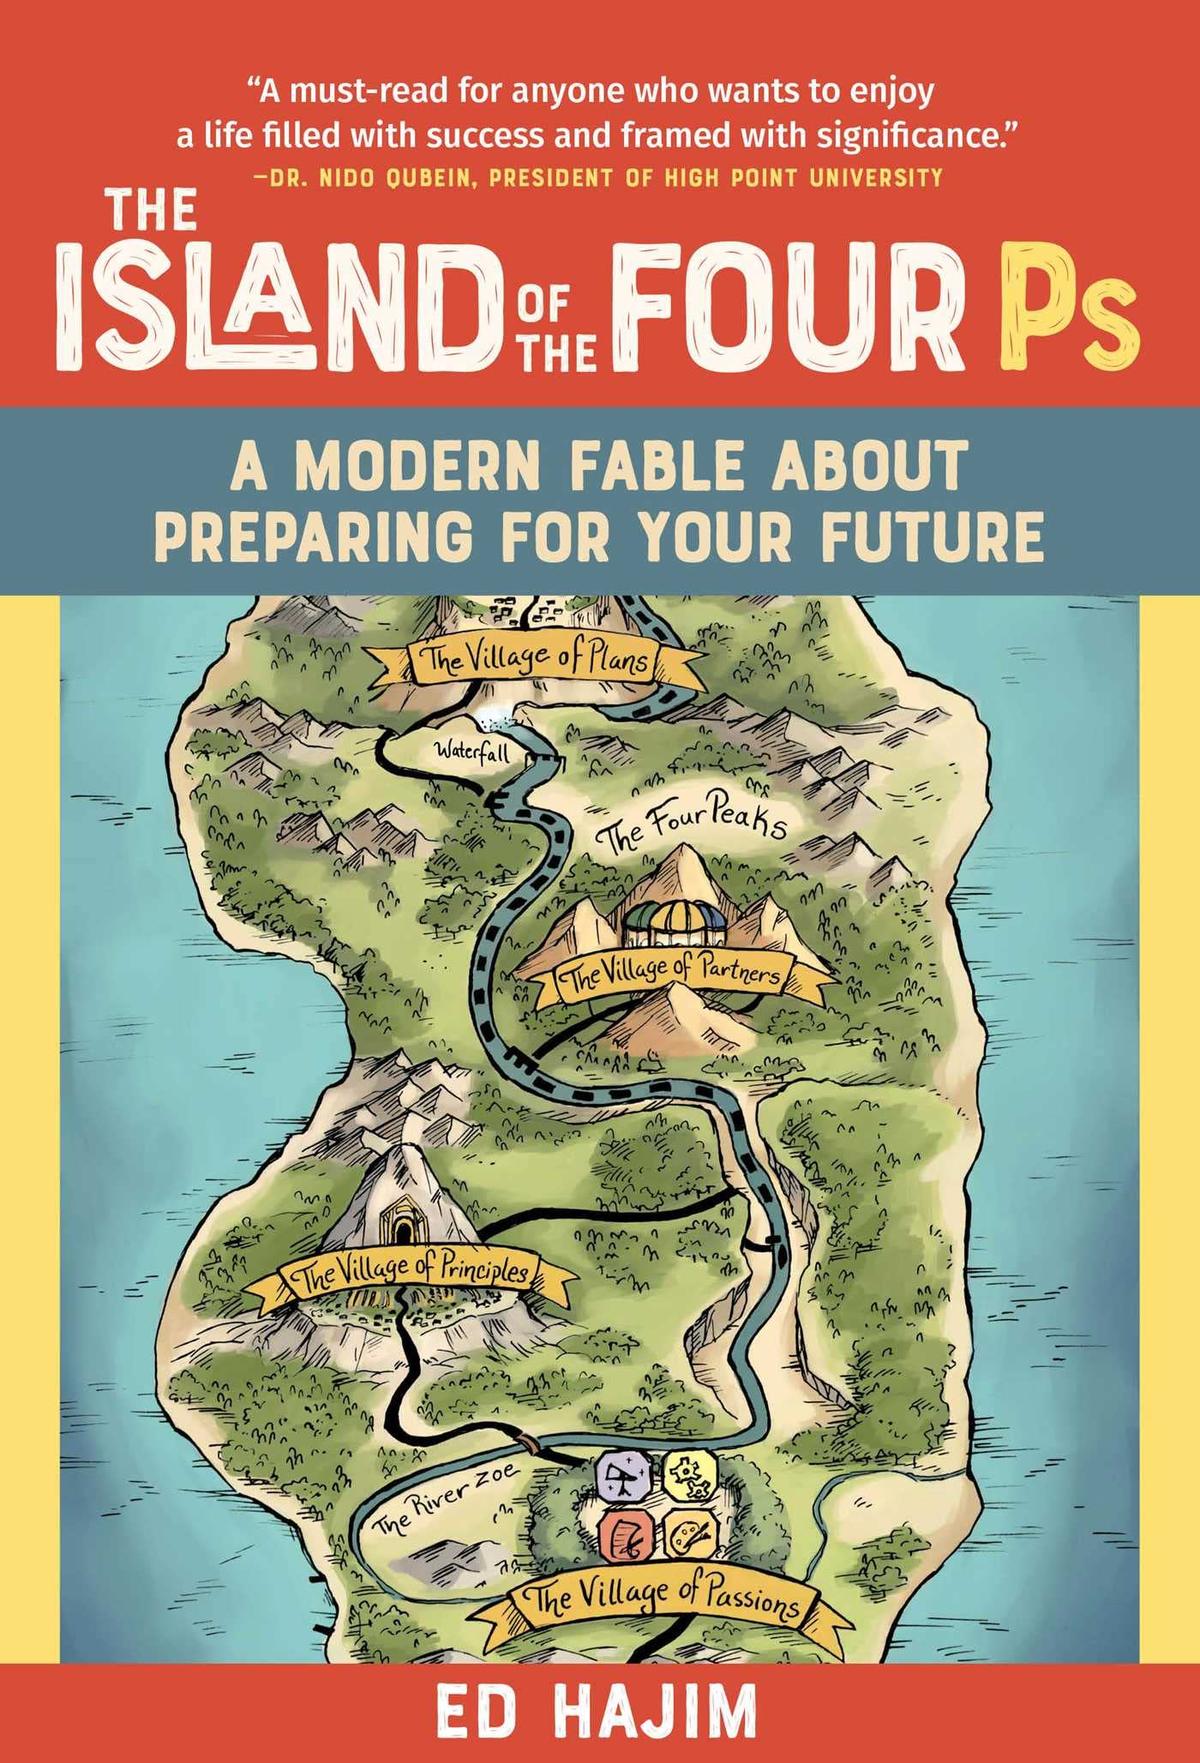 "The Island of the Four Ps: A Modern Fable About Preparing for Your Future" by Ed Hajim (Skyhorse, 2023).